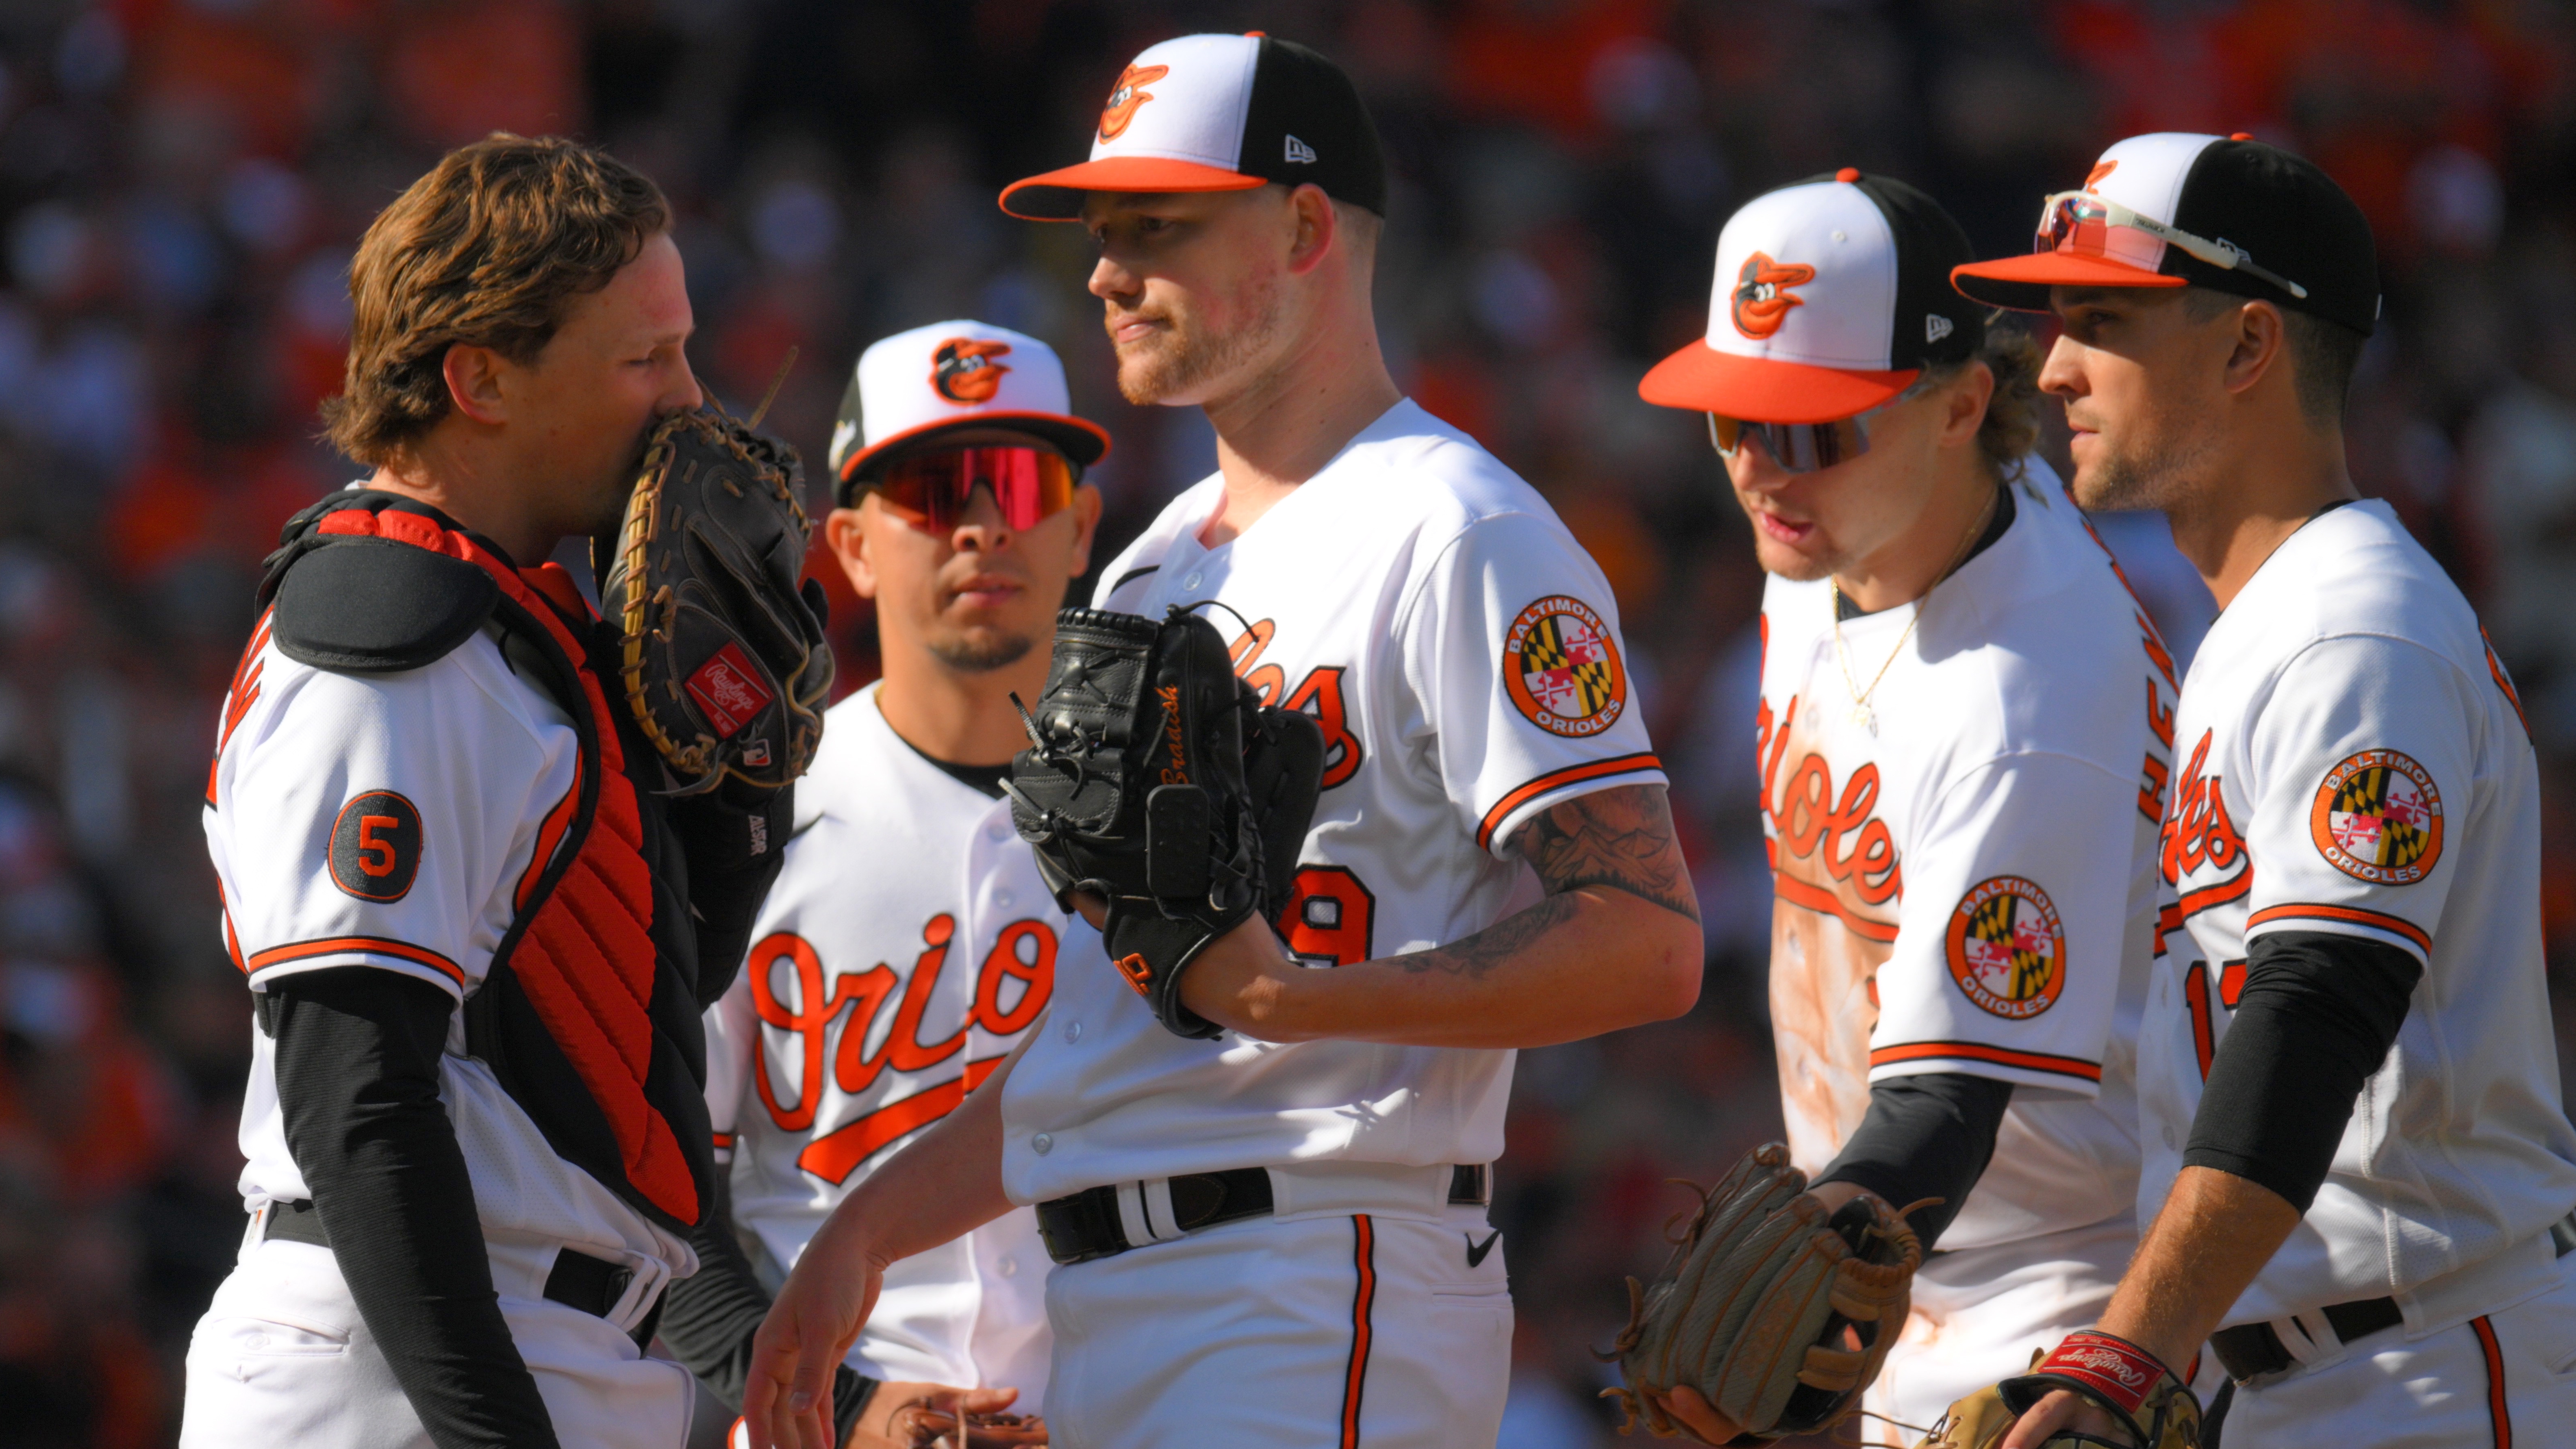 Orioles lose ALDS Game 2 to Rangers